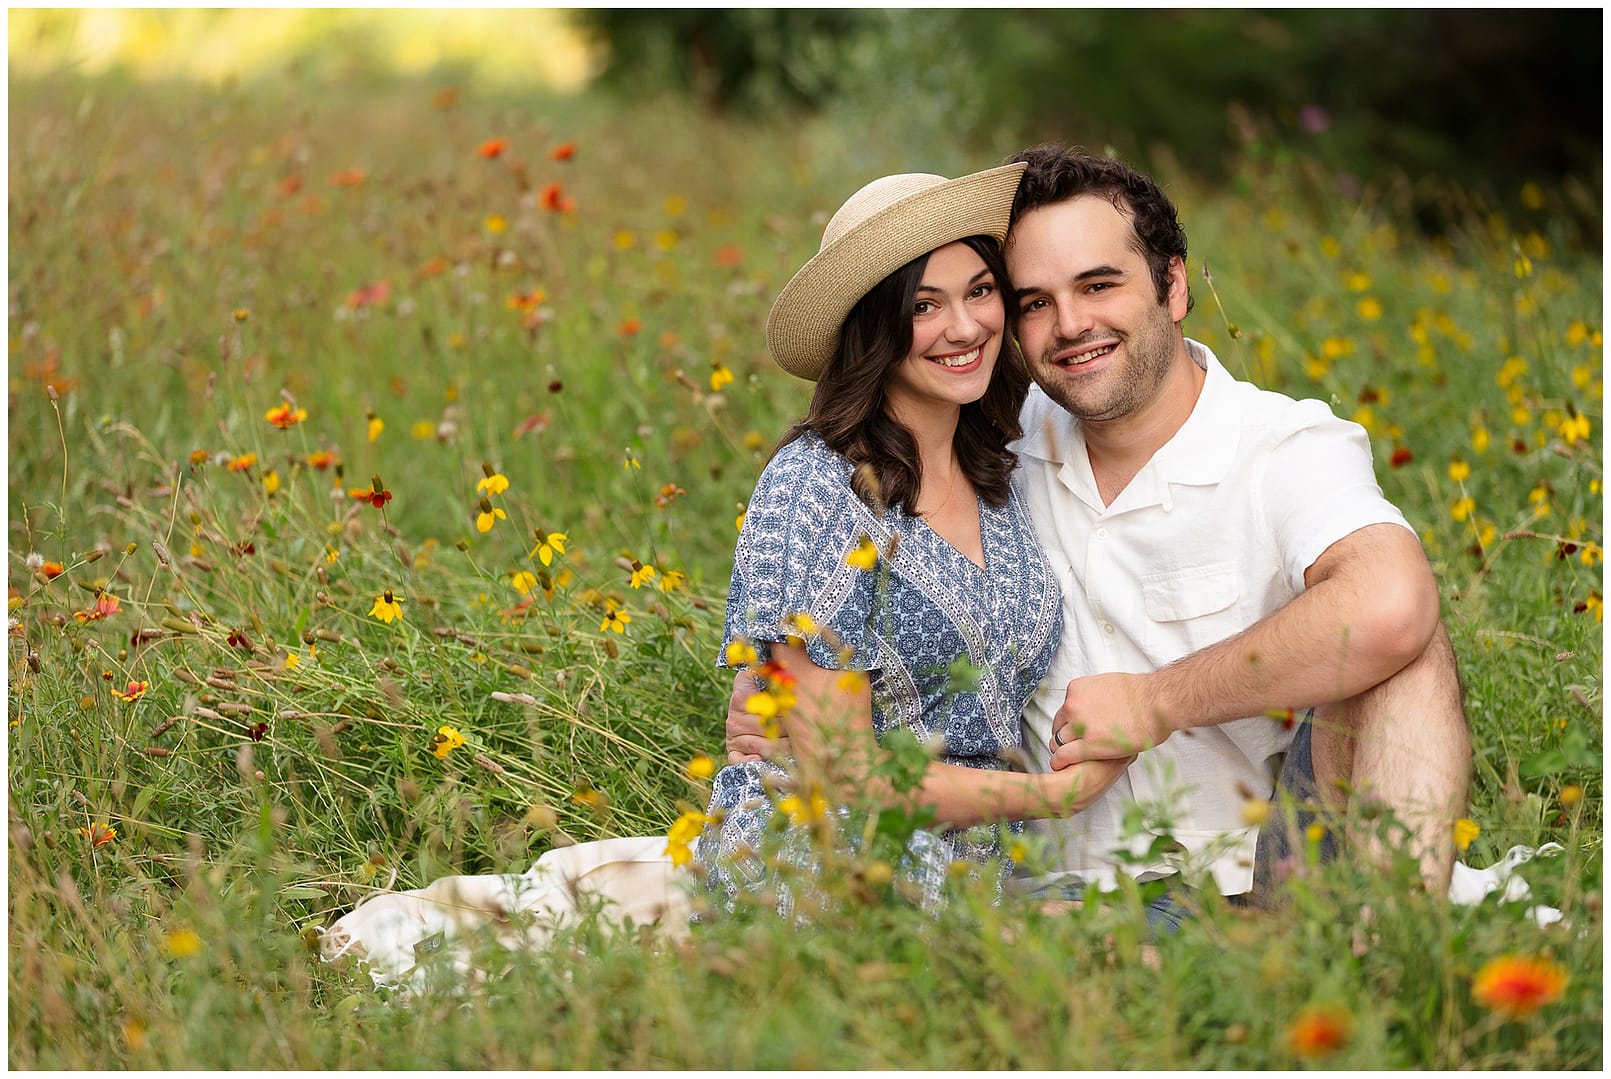 Mom & Dad pose for a portrait amongst the wildflowers. Photo by Tiffany Hix Photography.